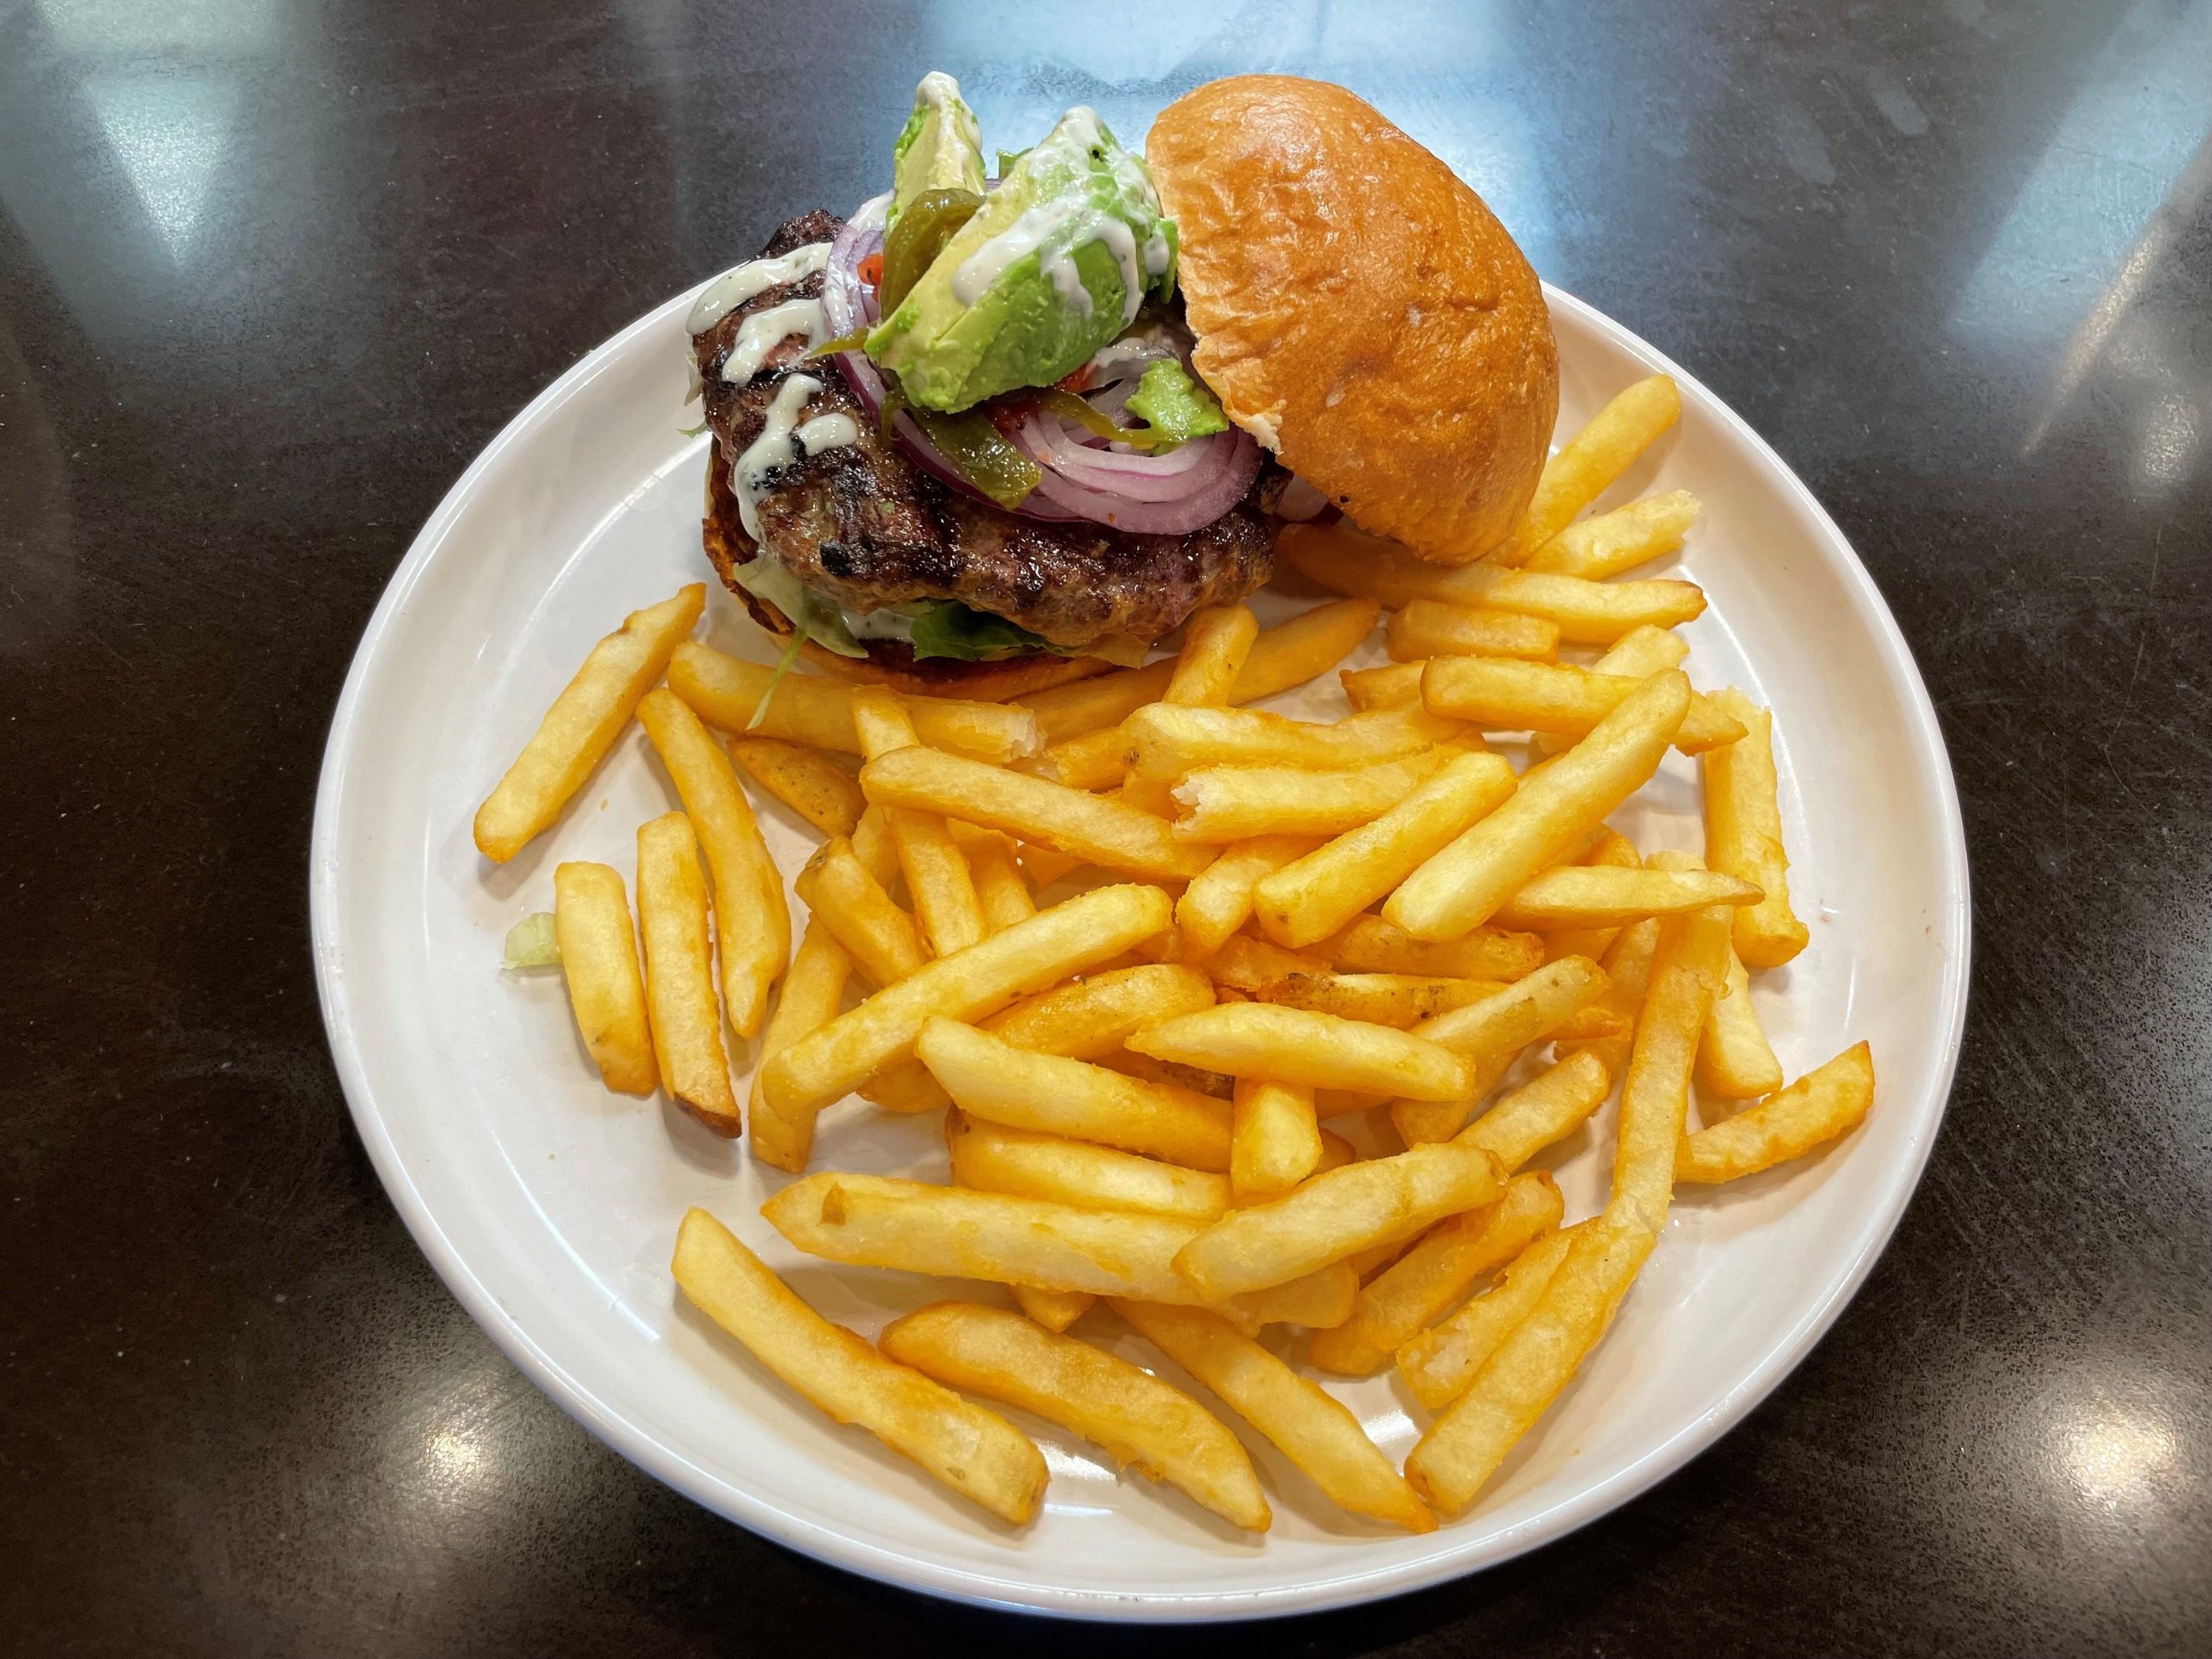 Bistro burger with avocado and french fries